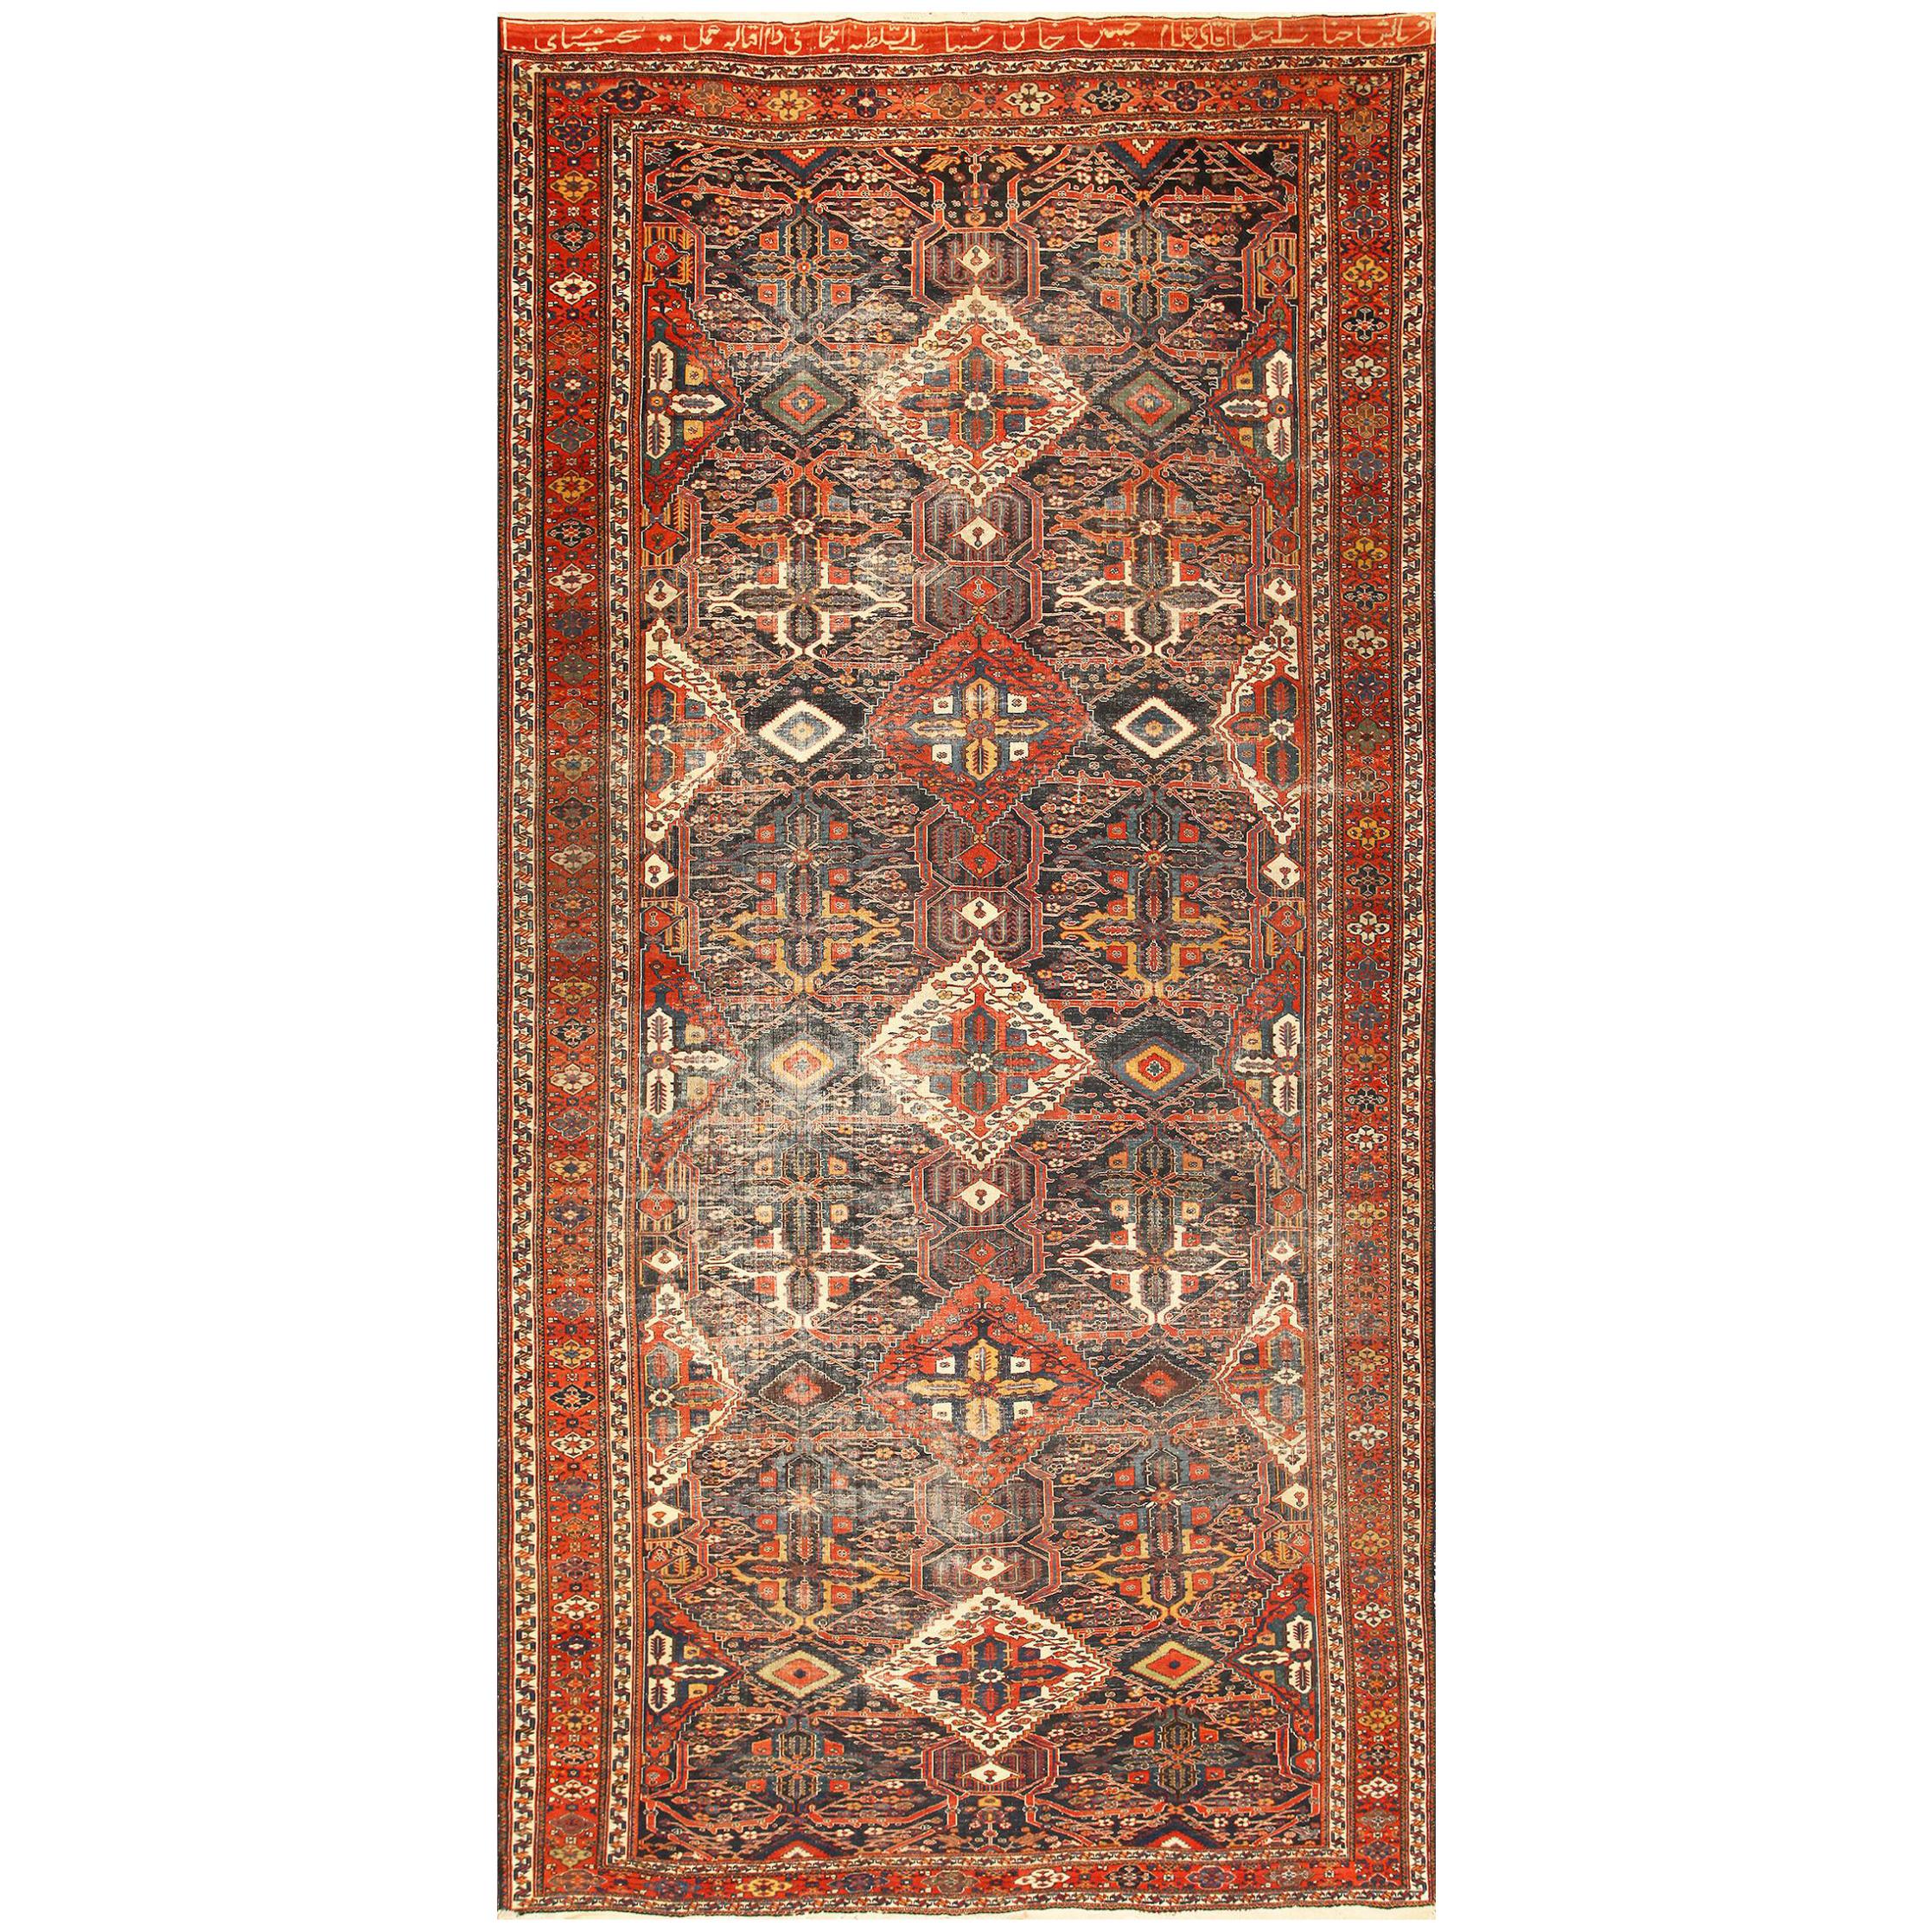 Antique Tribal Persian Bakhtiari Shabby Chic Rug. Size: 7 ft x 14 ft 3 in